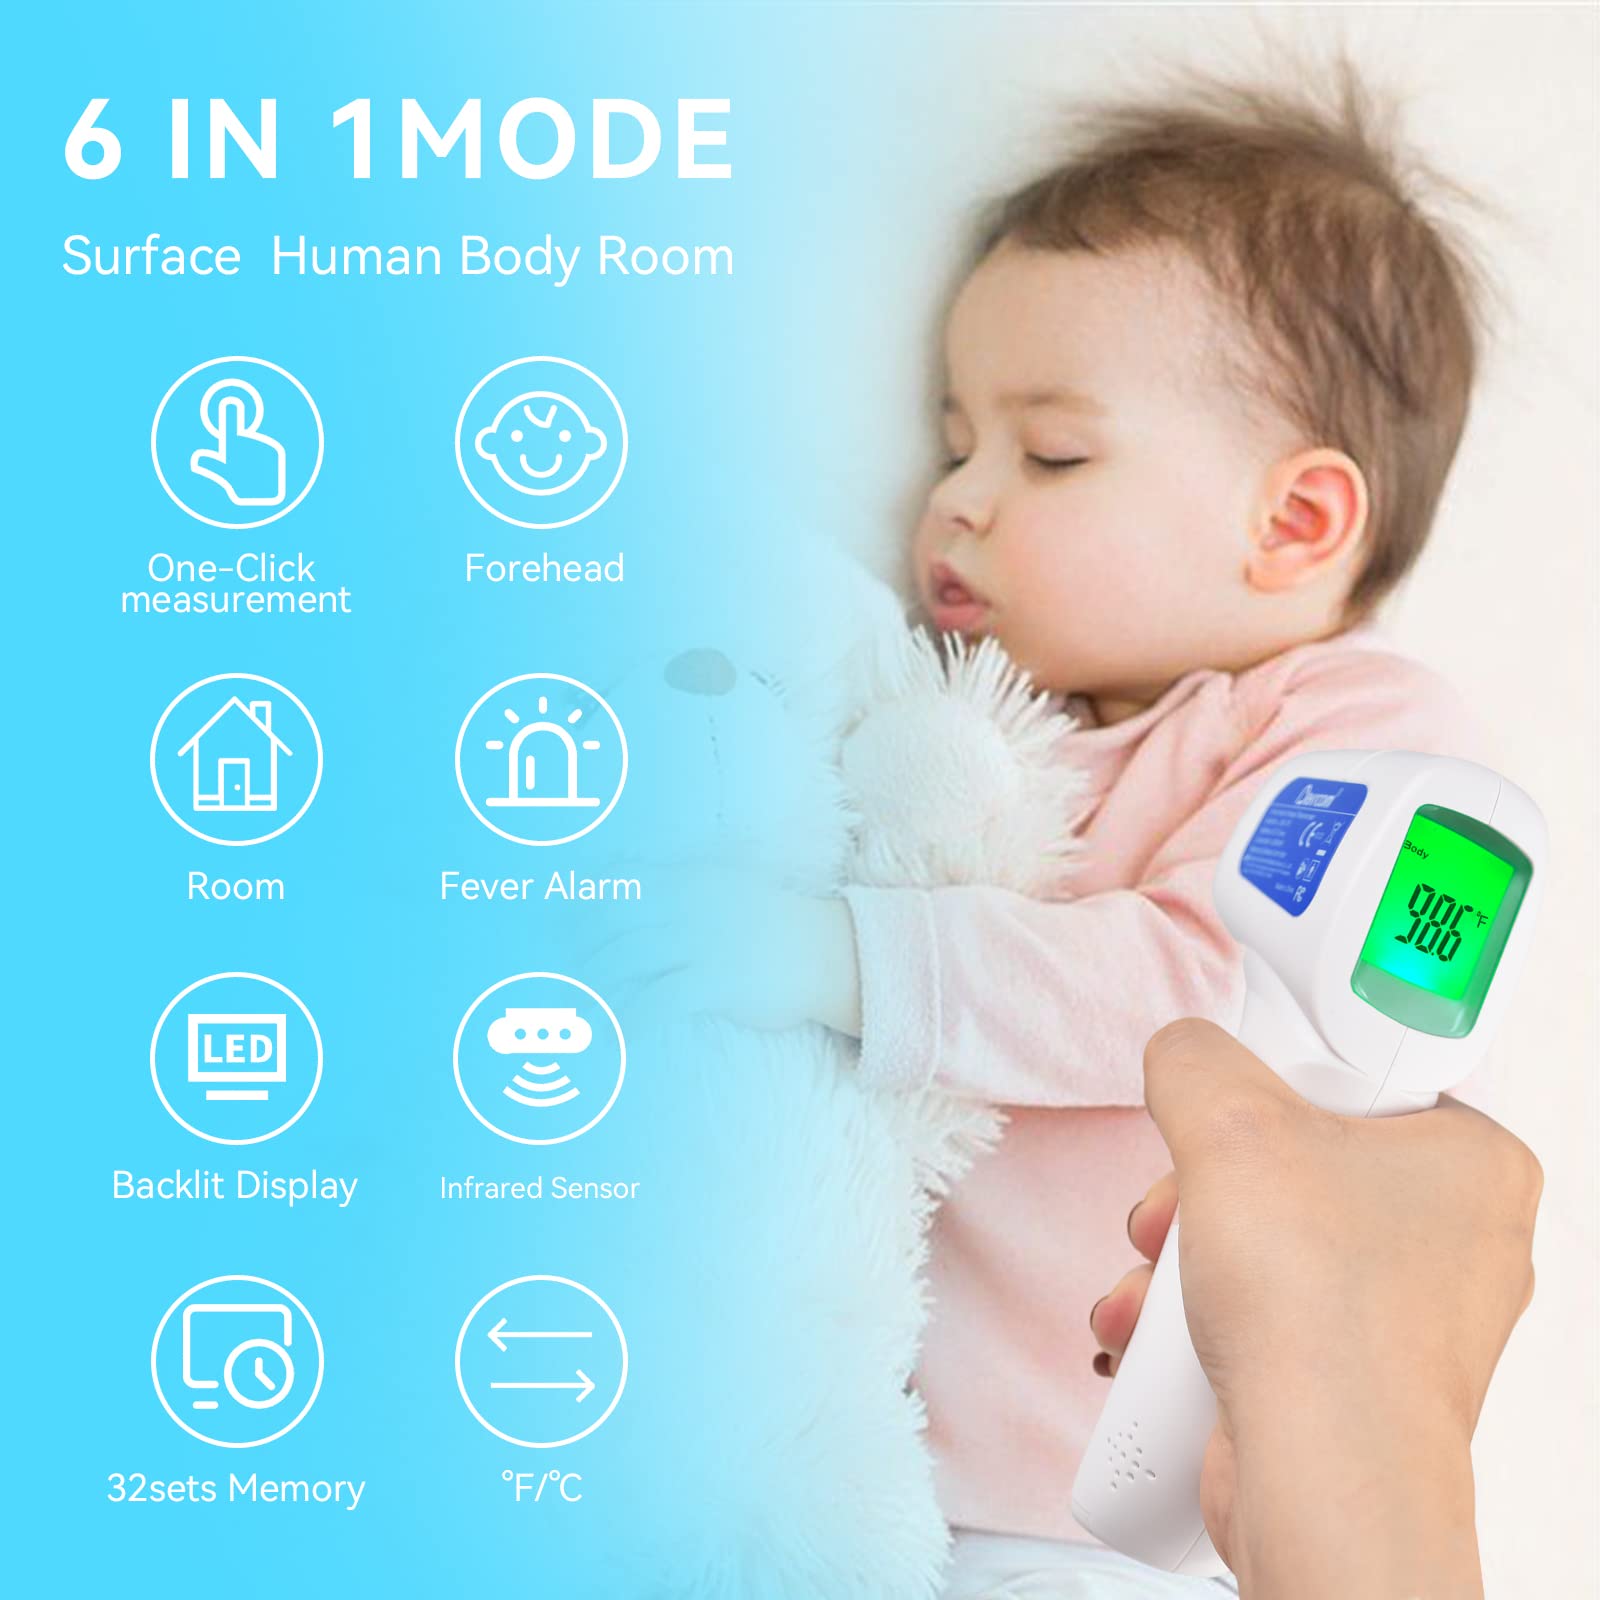 [Value Bundle] Berrcom No Touch Forehead Thermometer JXB315 & Berrcom Contactless Thermometer 3 in 1 for Adults and Kids JXB178